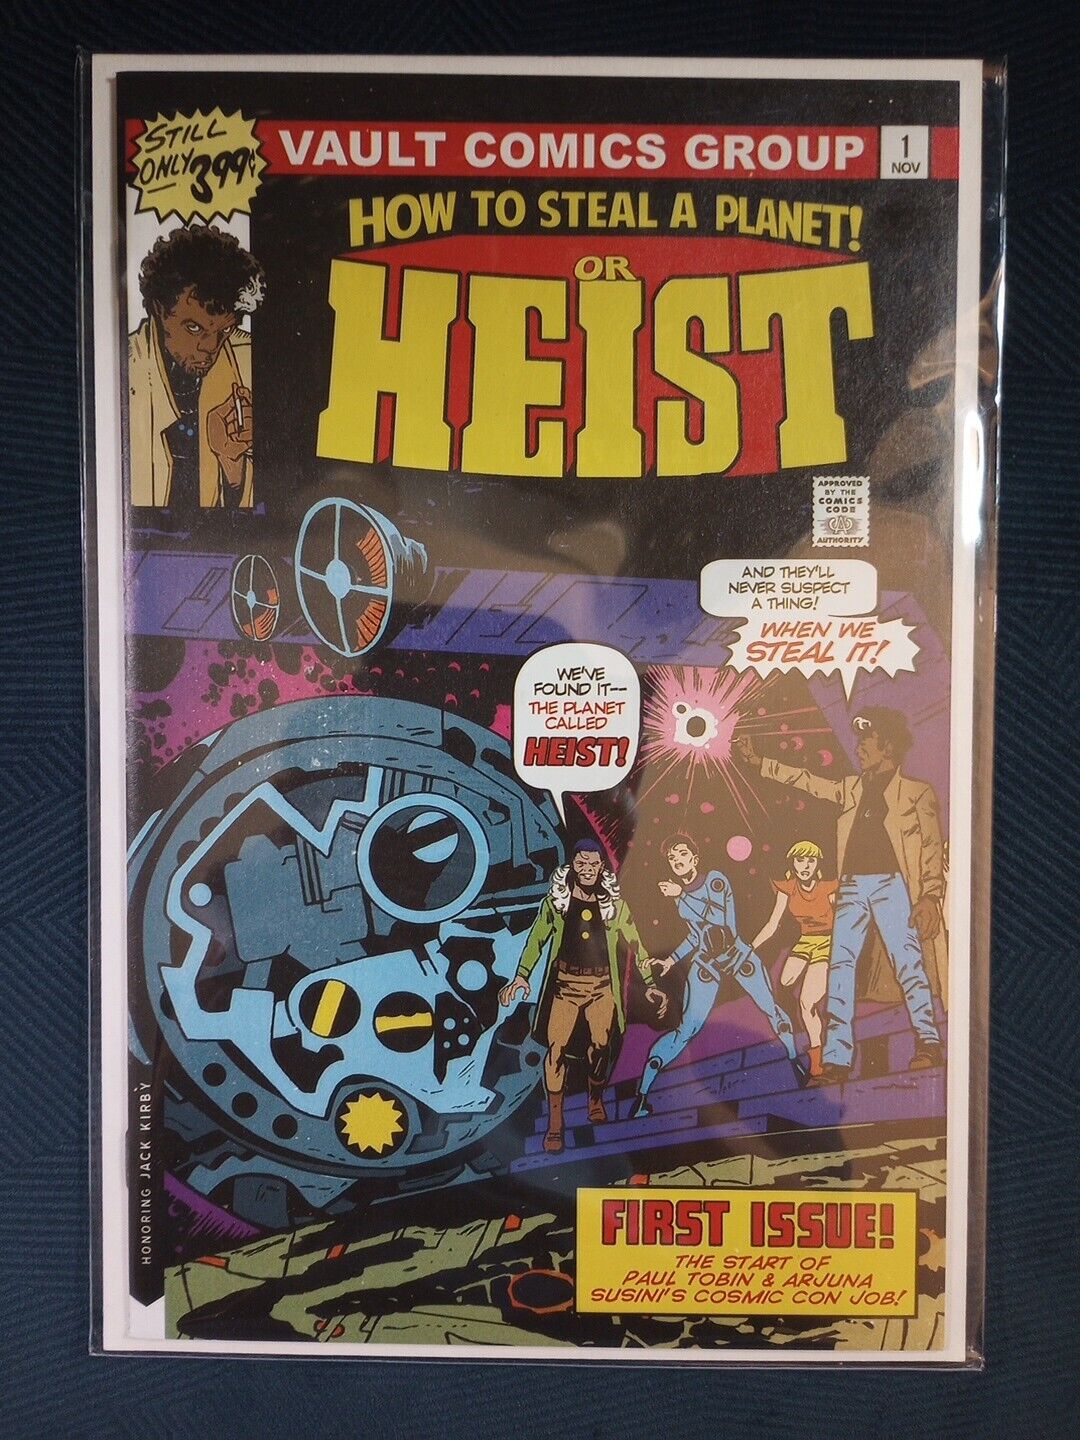 HEIST or How to Steal a Planet #1 (2019) CBSI sealed Exclusive 250 copies VHTF